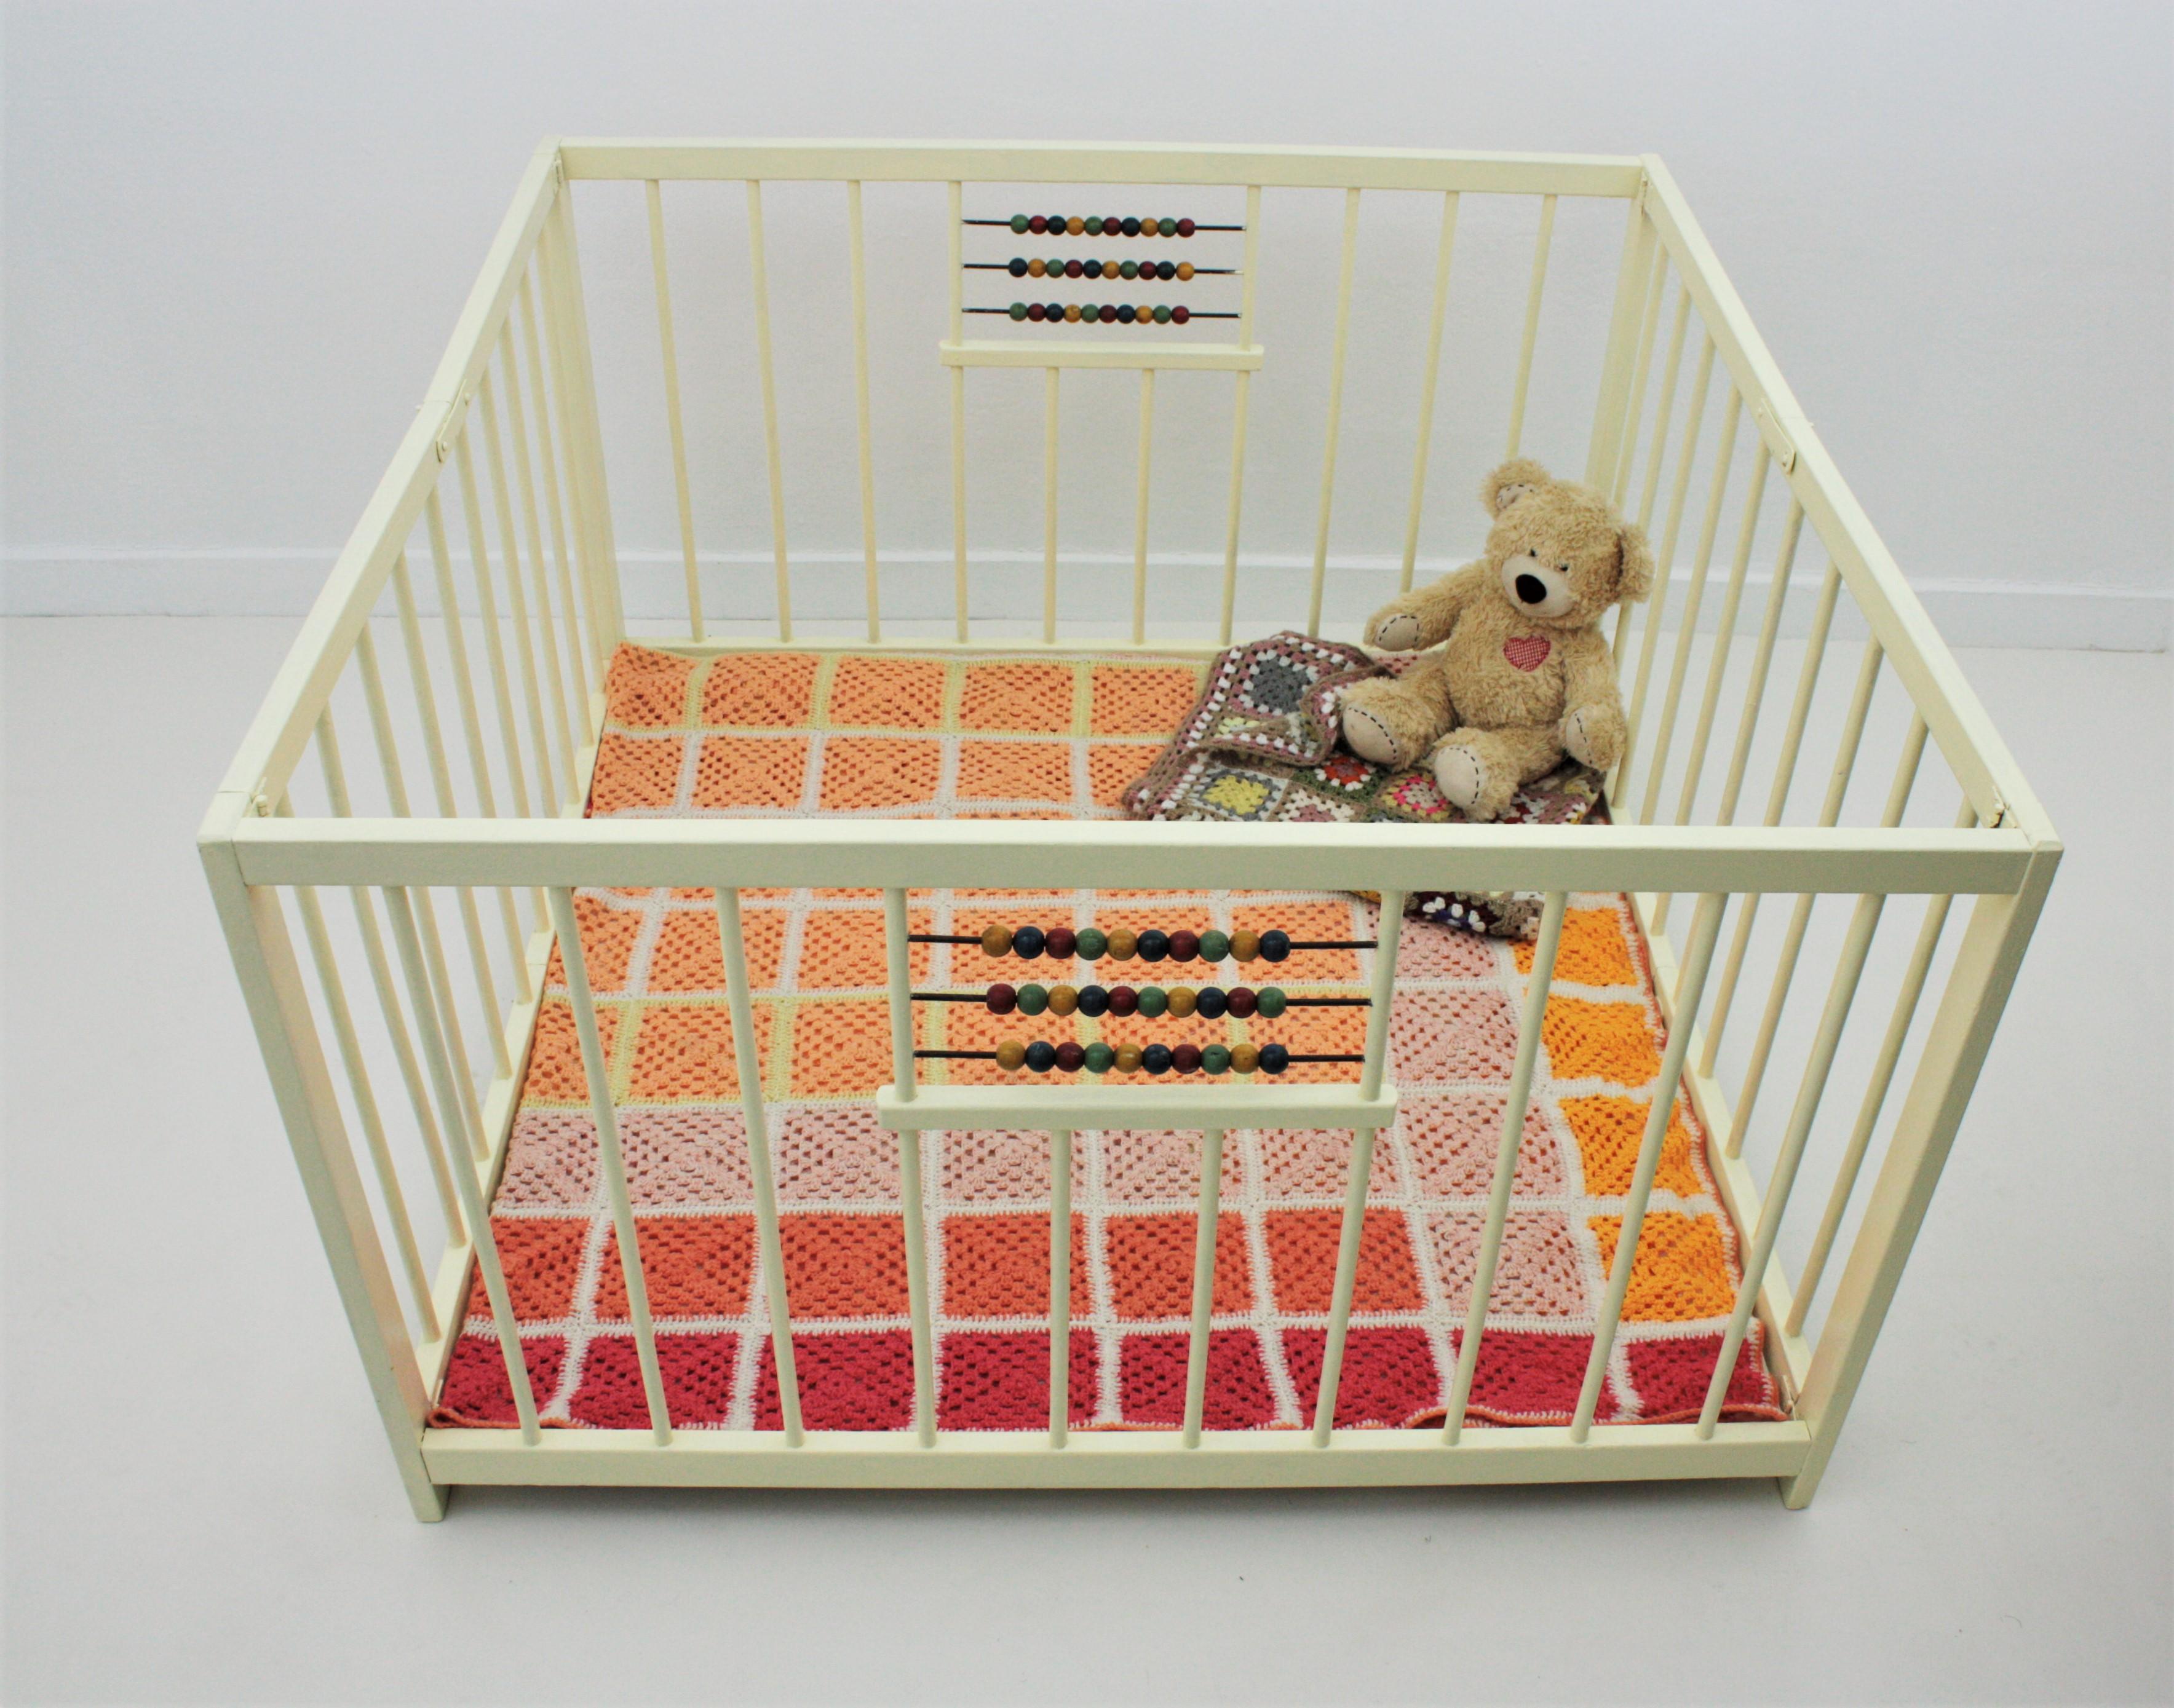 Painted Spanish 1950s Folding Wooden Childs Playpen with Beads Abacus Toy For Sale